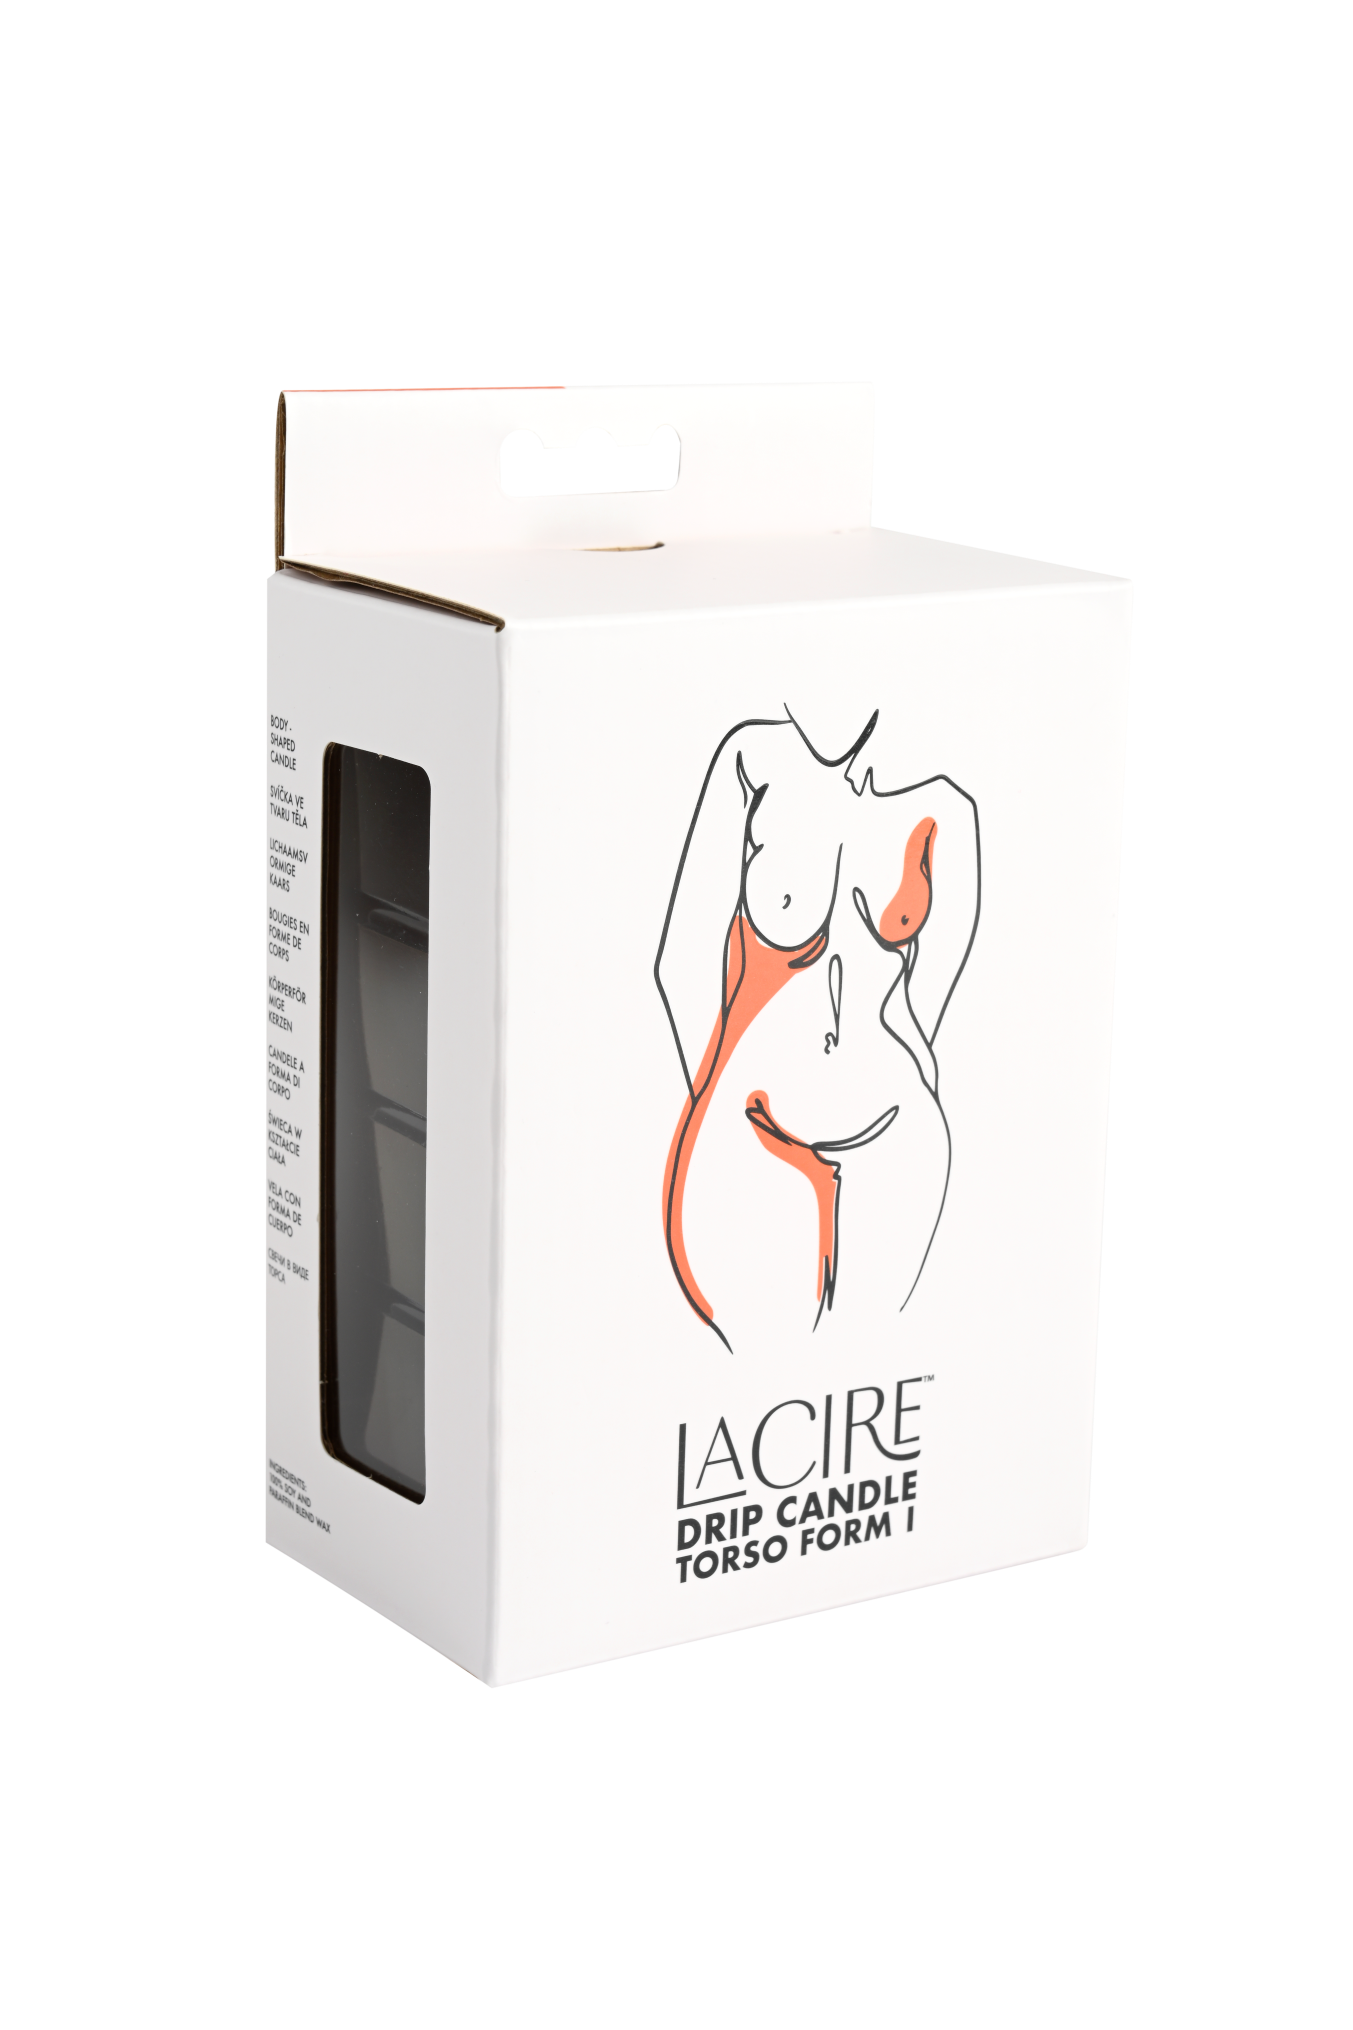 Photo of the side angle of the box for the LaCire Torso Candle from Sportsheets (form 1/orange).